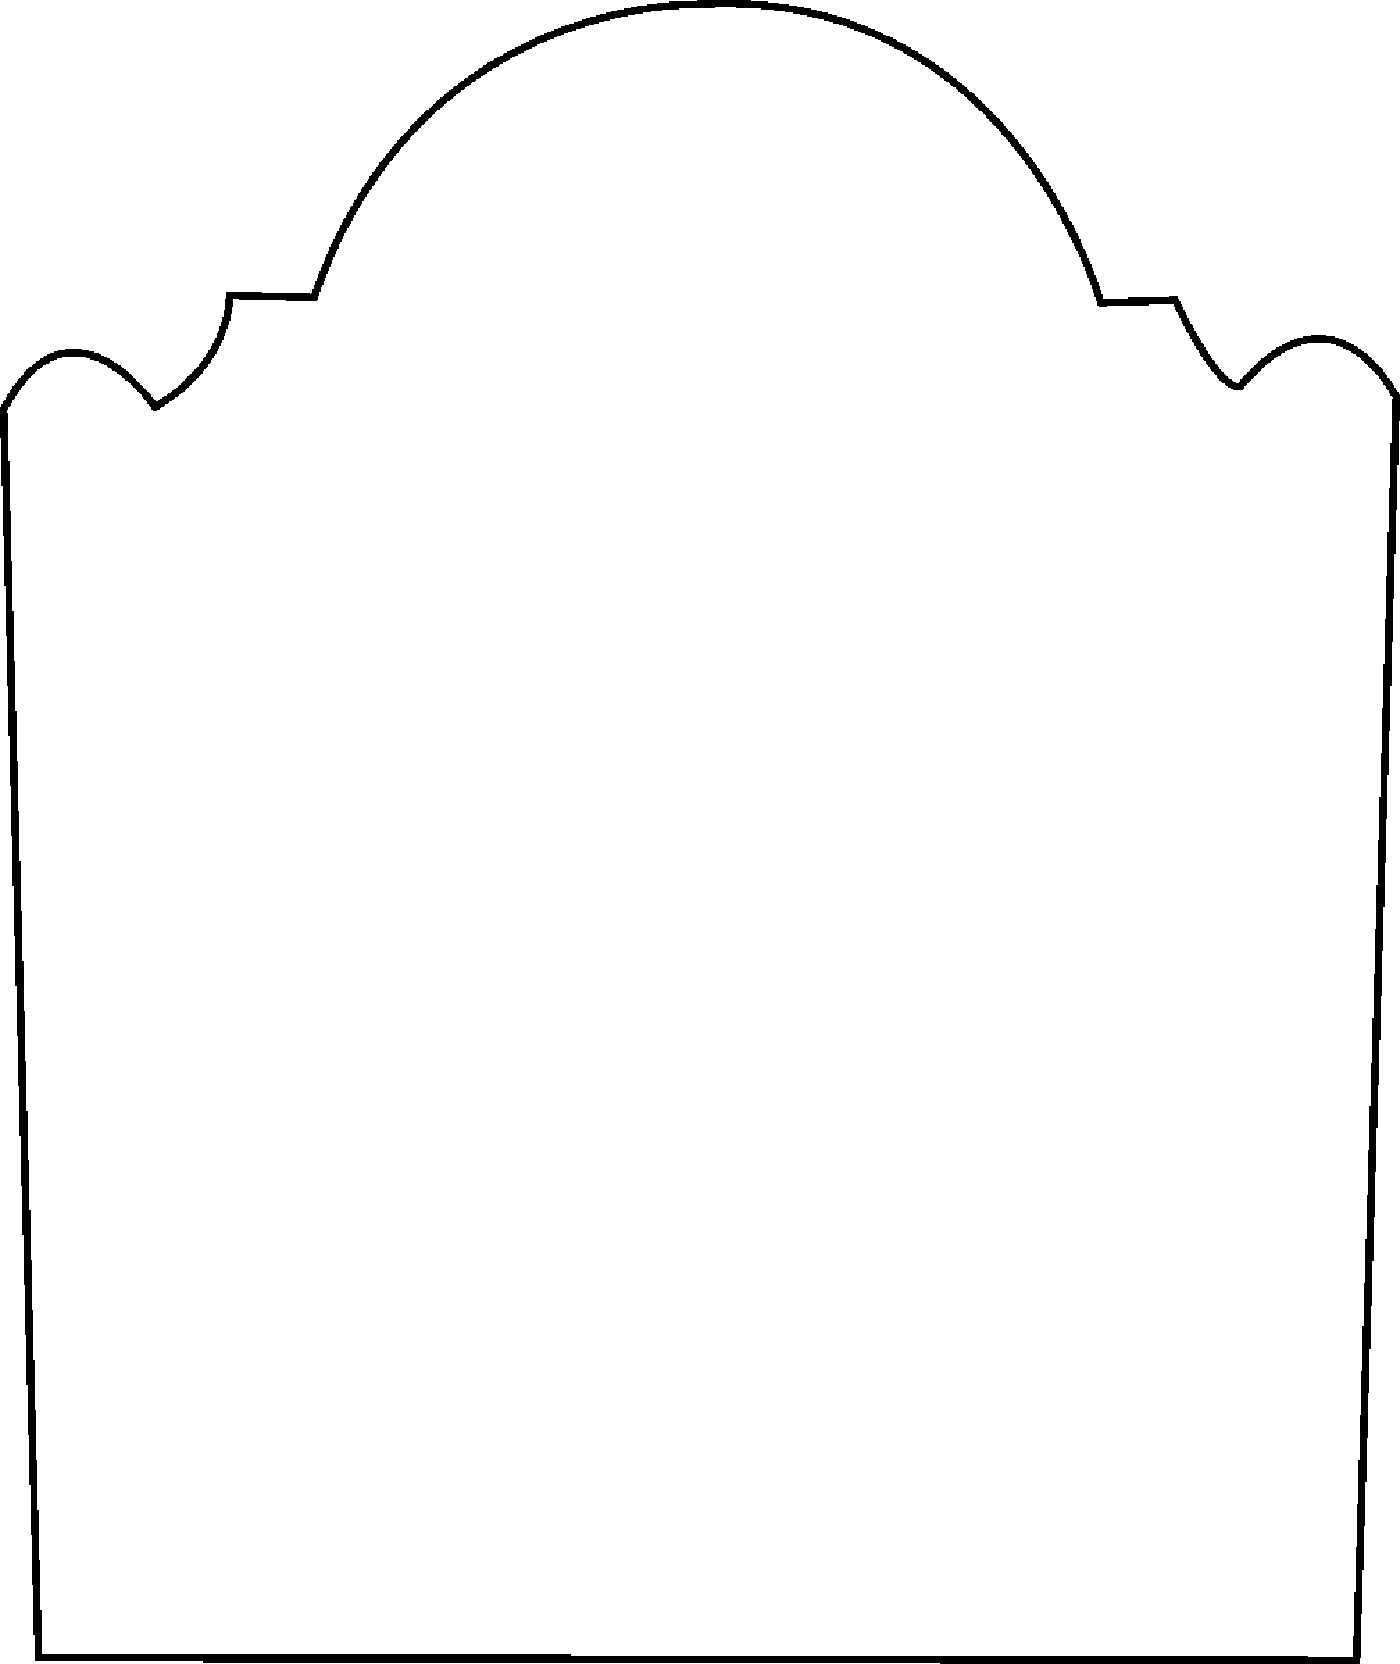 Blank Tombstone Template - ClipArt Best